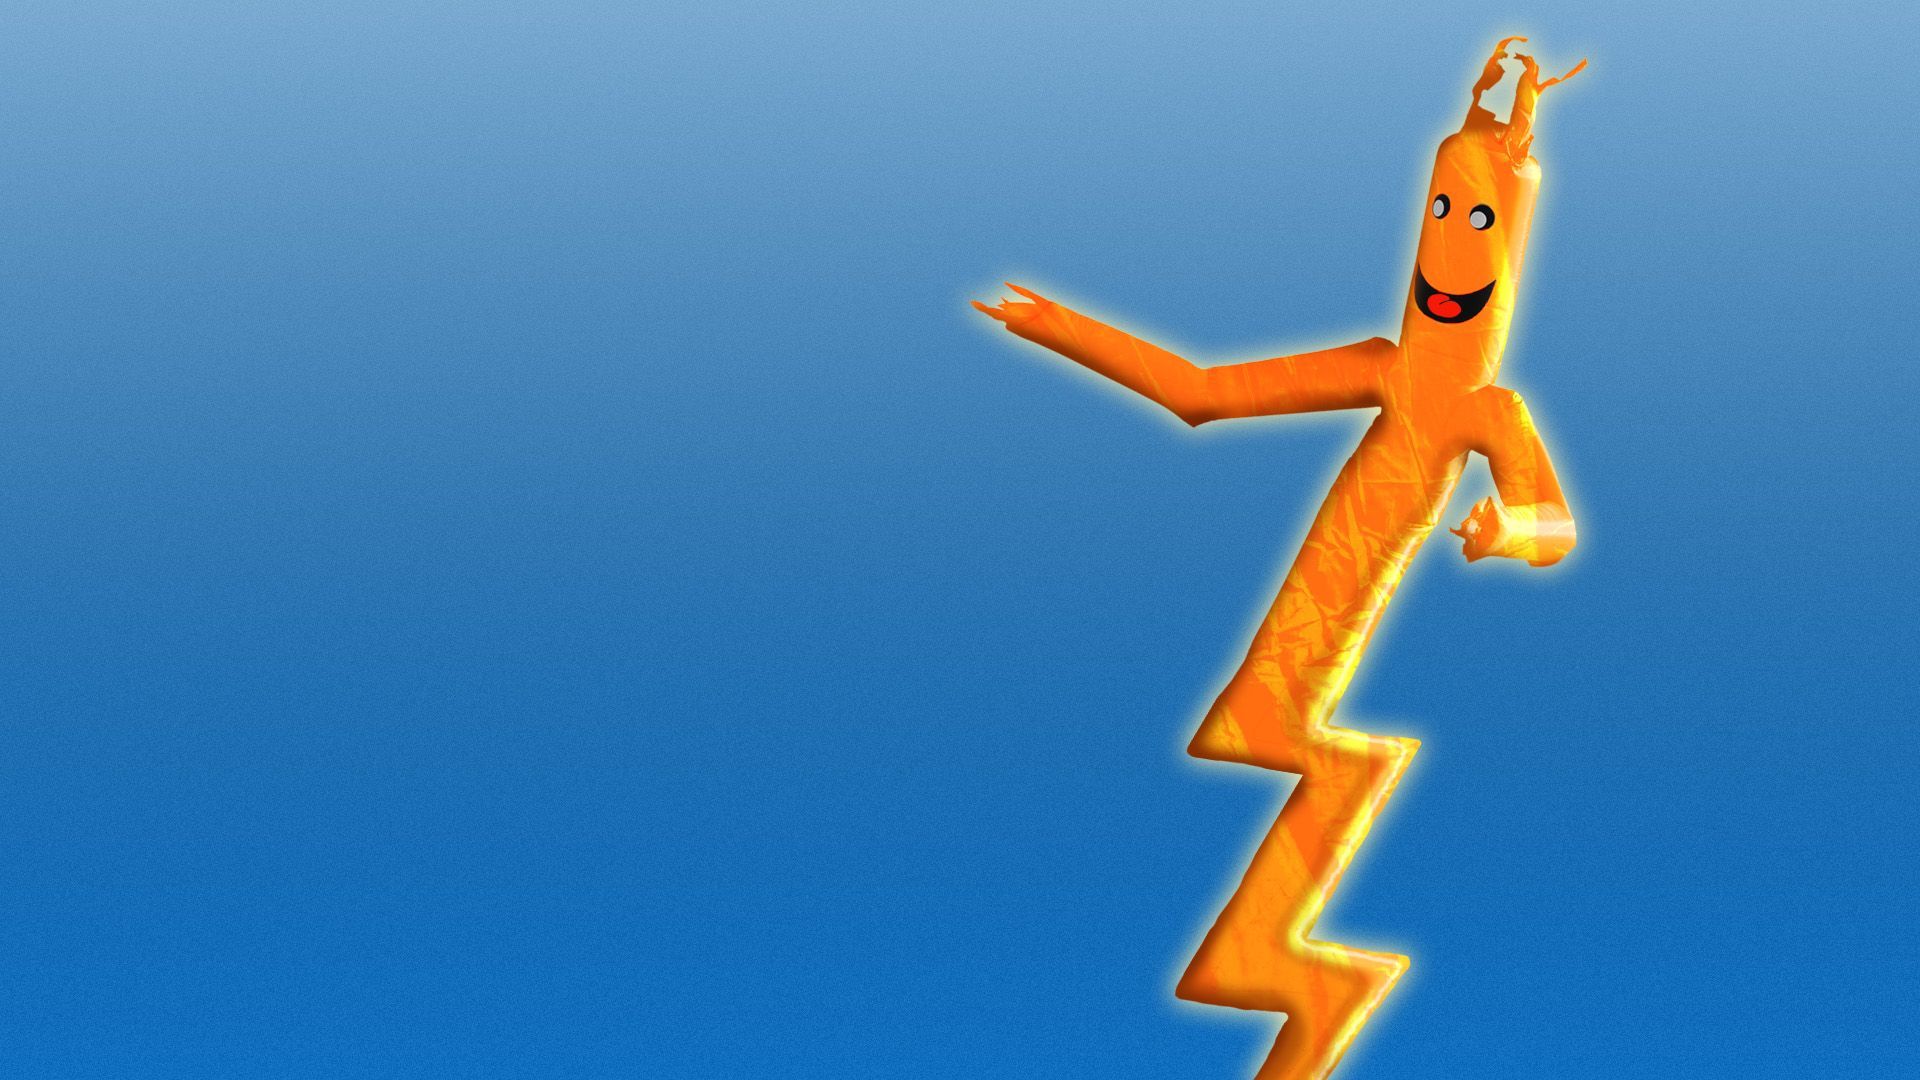 Illustration of an inflatable used car inflatable tube man in the shape of a lightning bolt